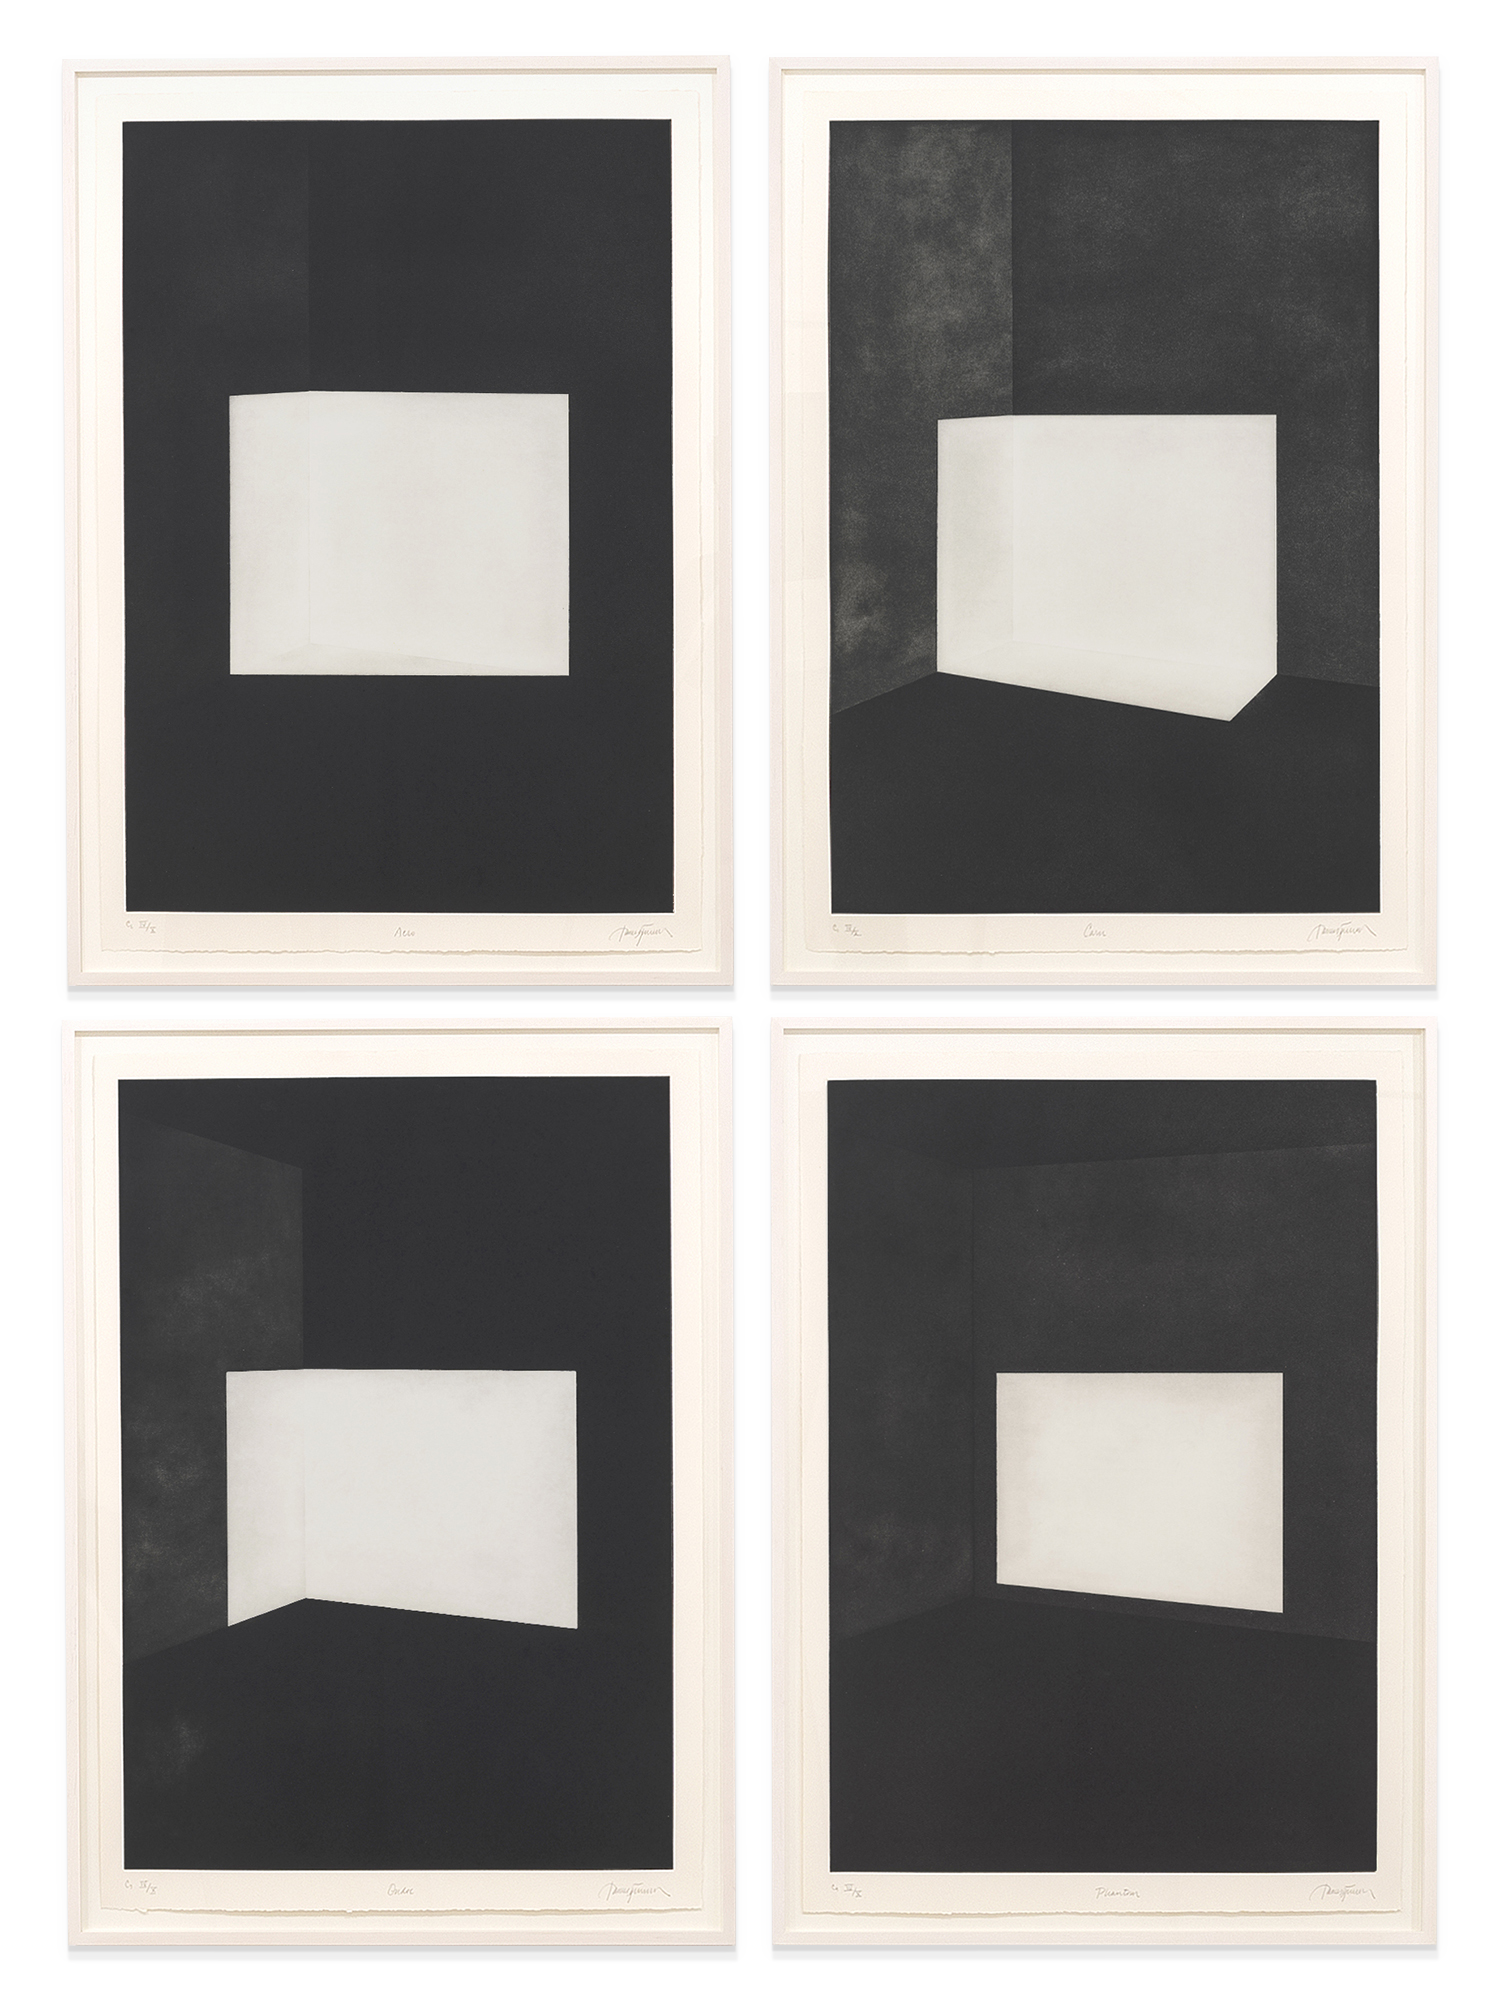 James Turrell First Light (Rectangles), 1989-90 Set of 4 etchings with aquatint 40 1/2 x 30 inches (102.9 x 76.2 cm) each Edition of 30